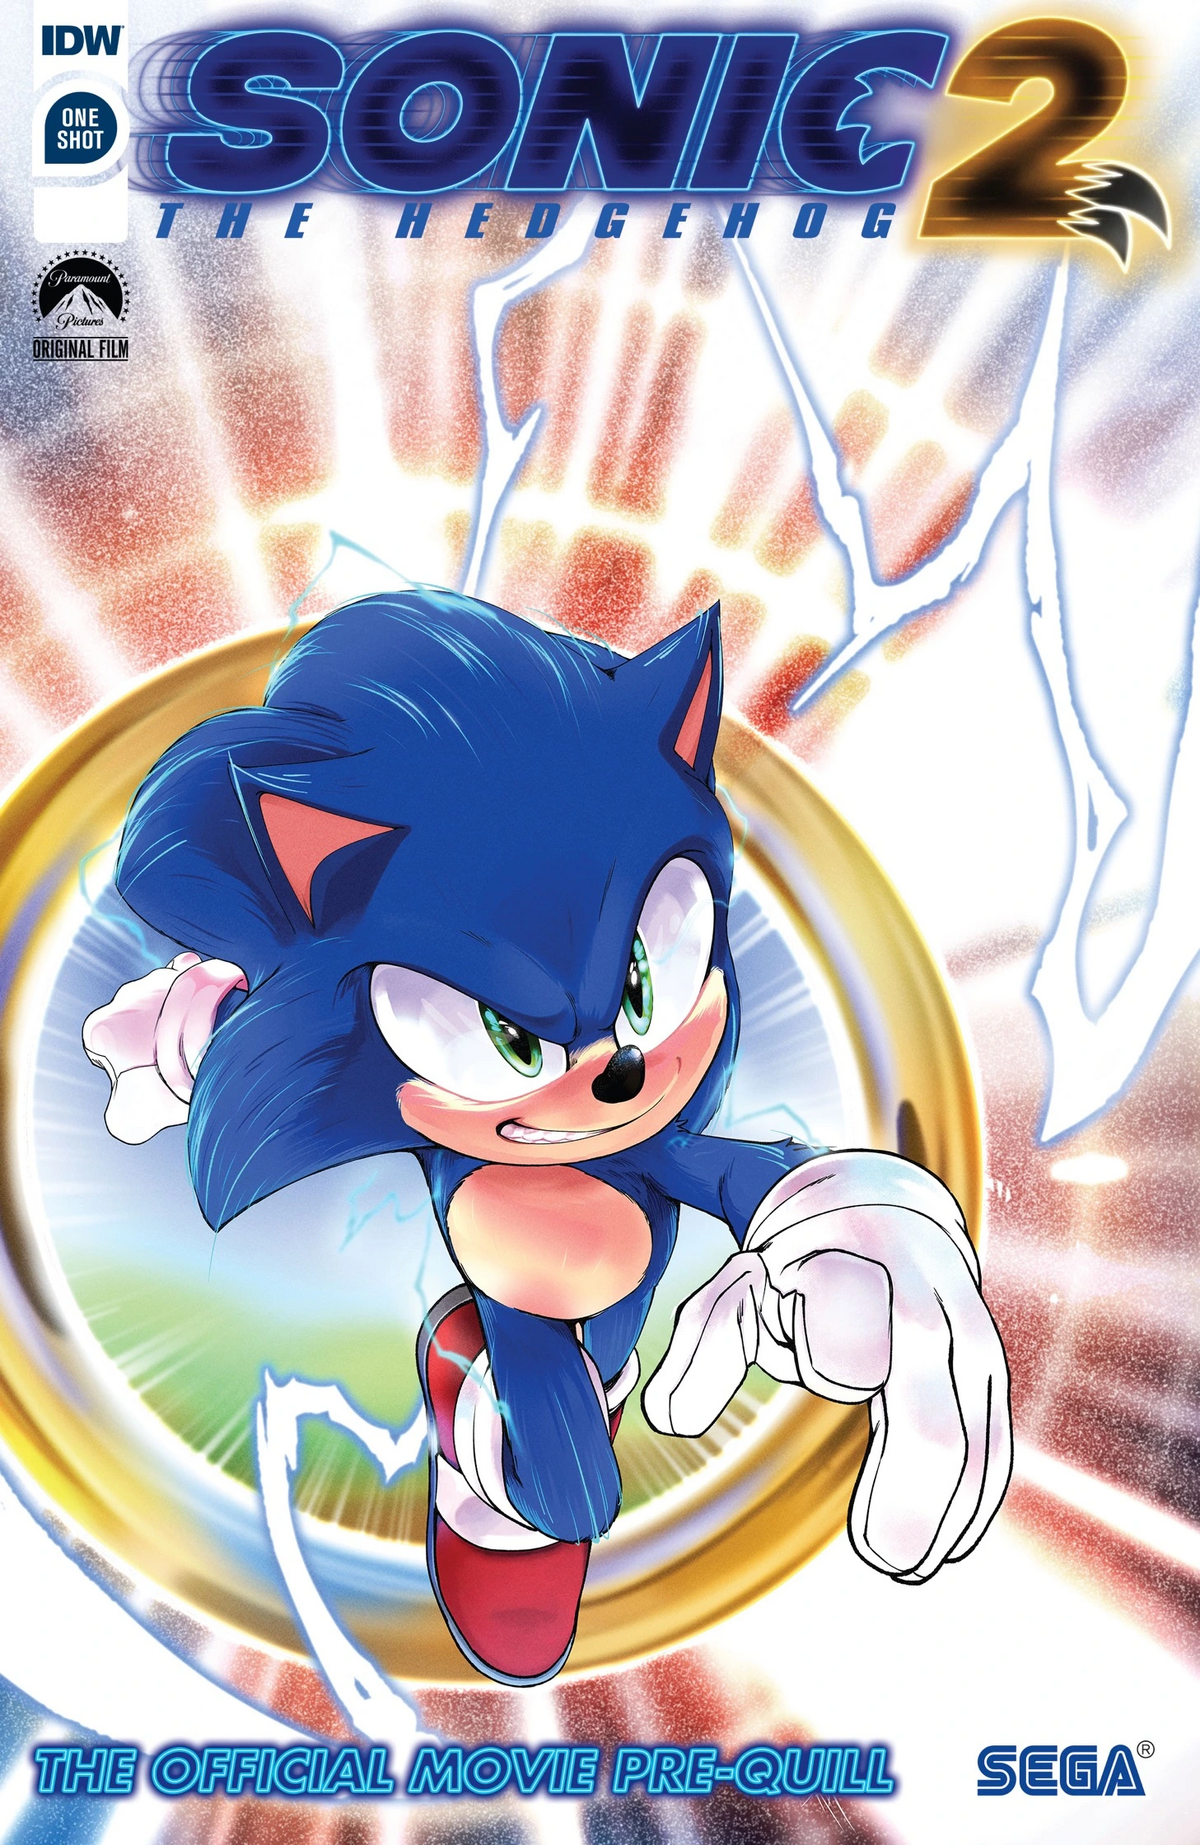 https://static.wikia.nocookie.net/sonic-cinema/images/d/db/Sonic_the_Hedgehog_2_-_The_Official_Movie_Pre-Quill.webp/revision/latest/scale-to-width-down/1200?cb=20220331152232